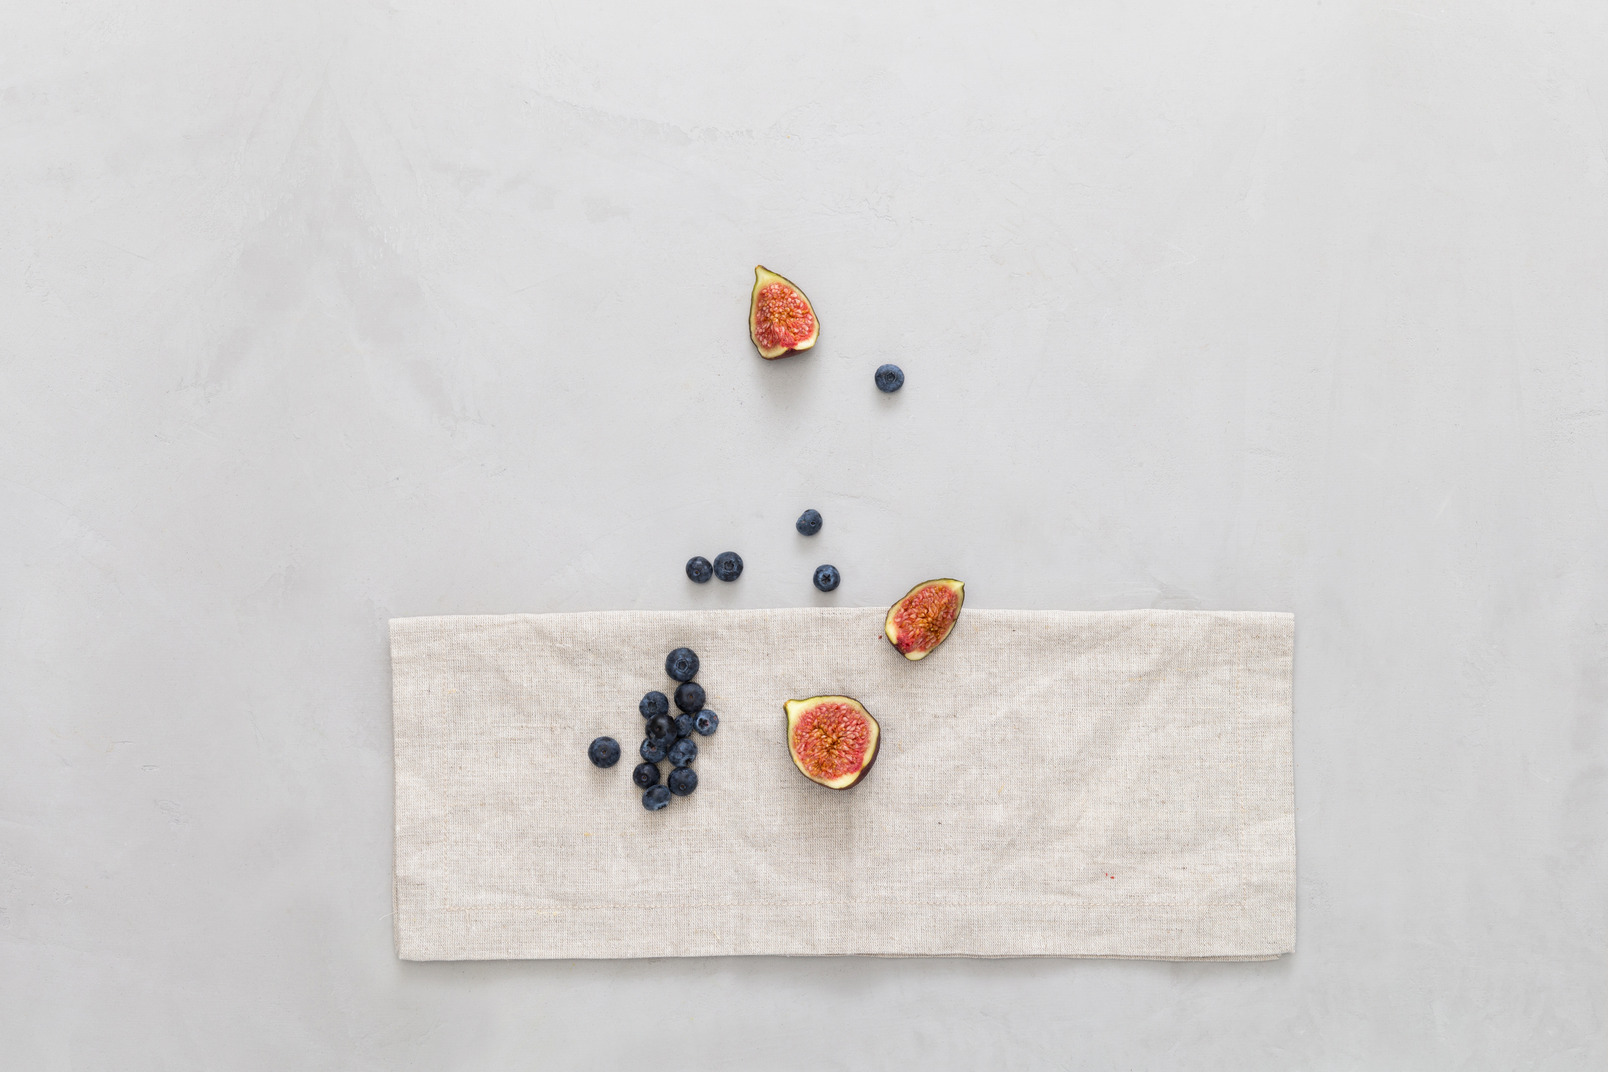 Blueberries and figs on a linen tablecloth